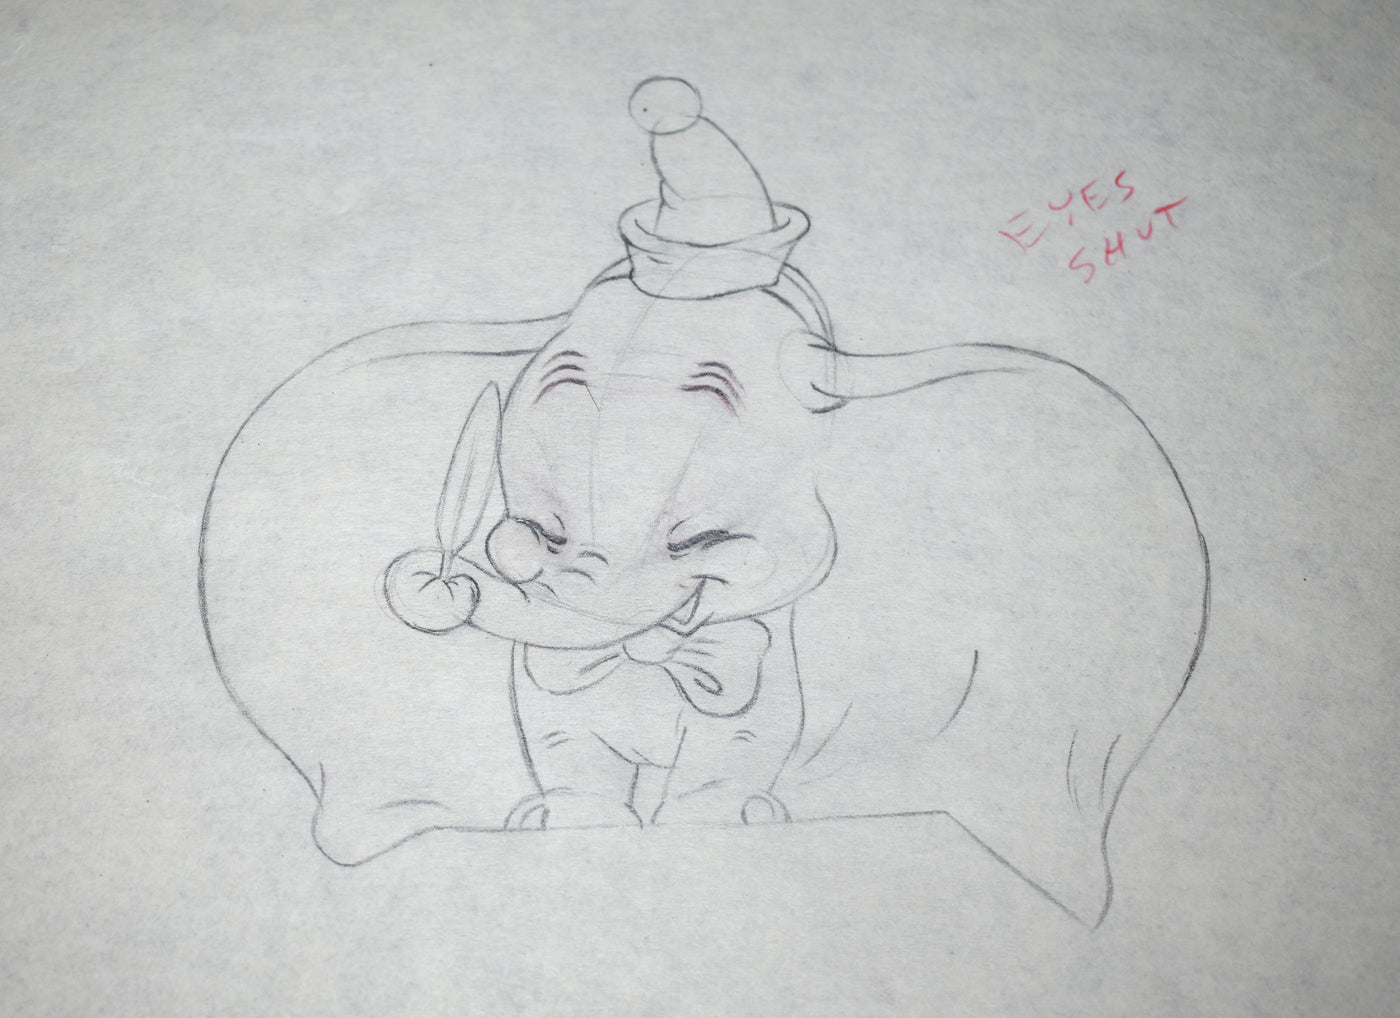 Original Production Drawing from Dumbo featuring Dumbo